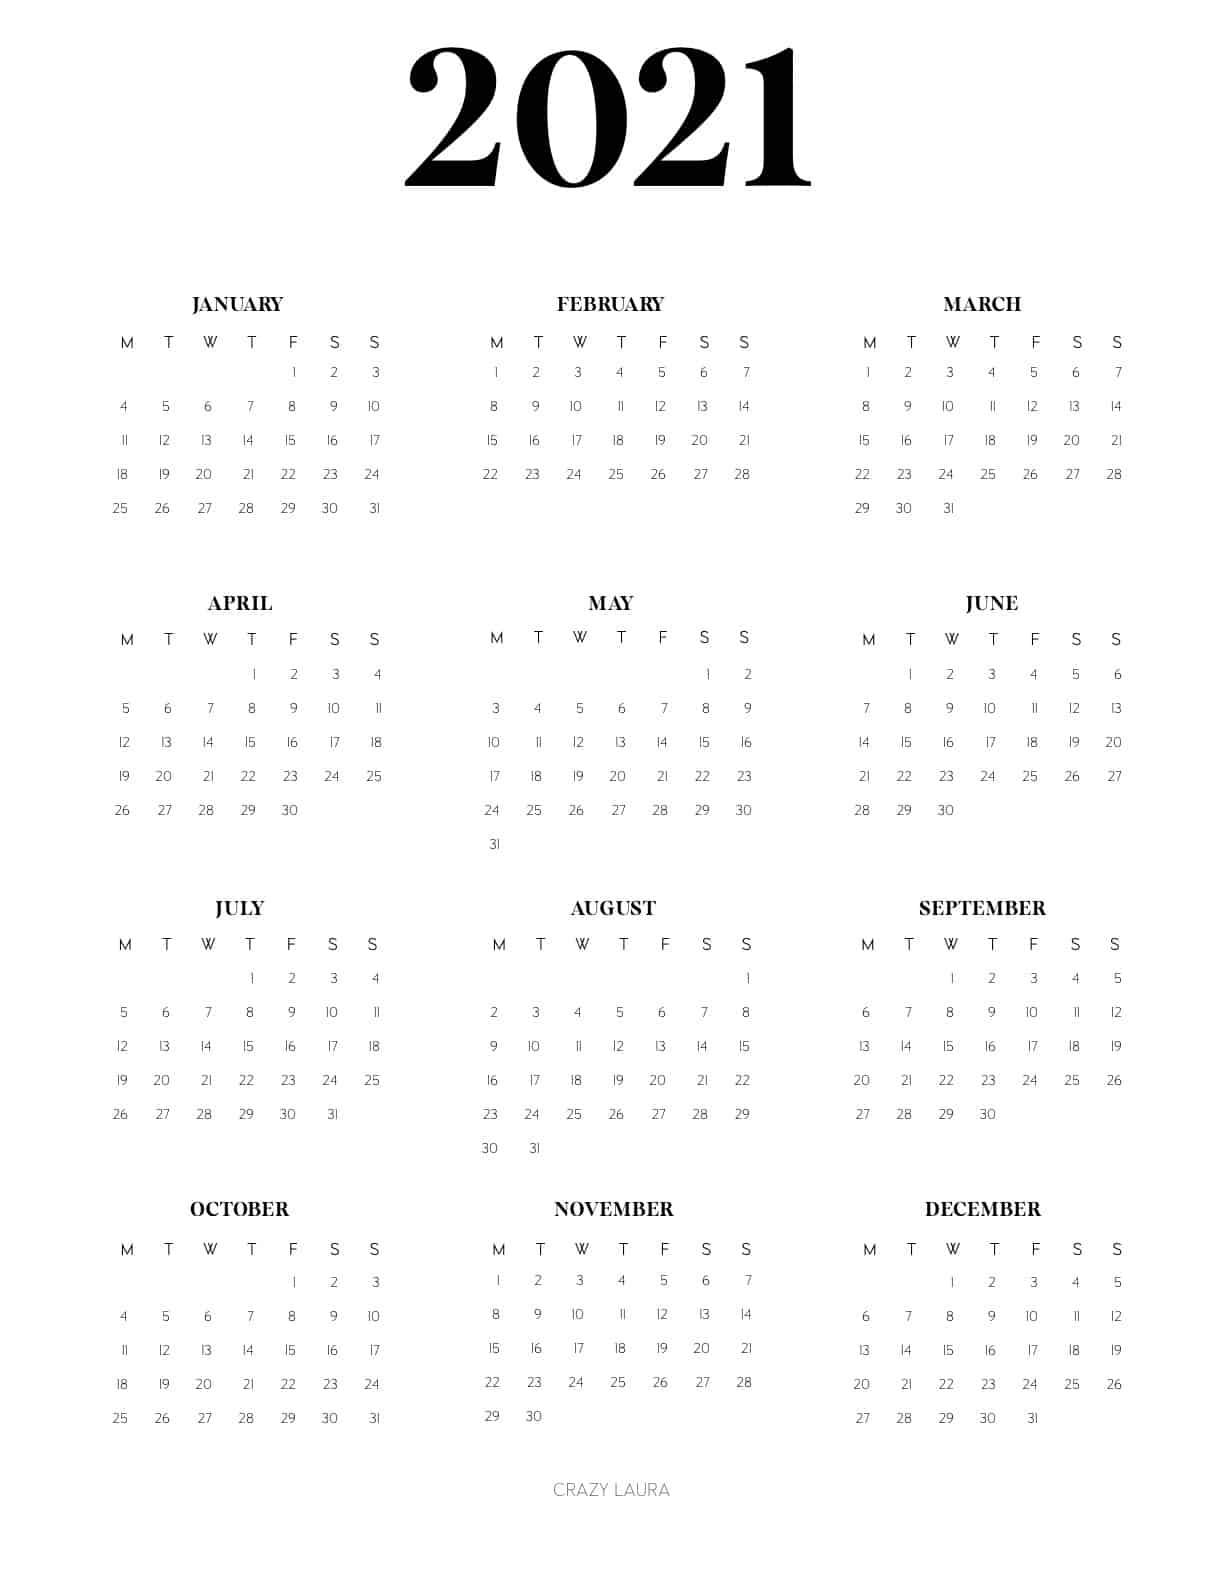 2021 yearly calendar overview